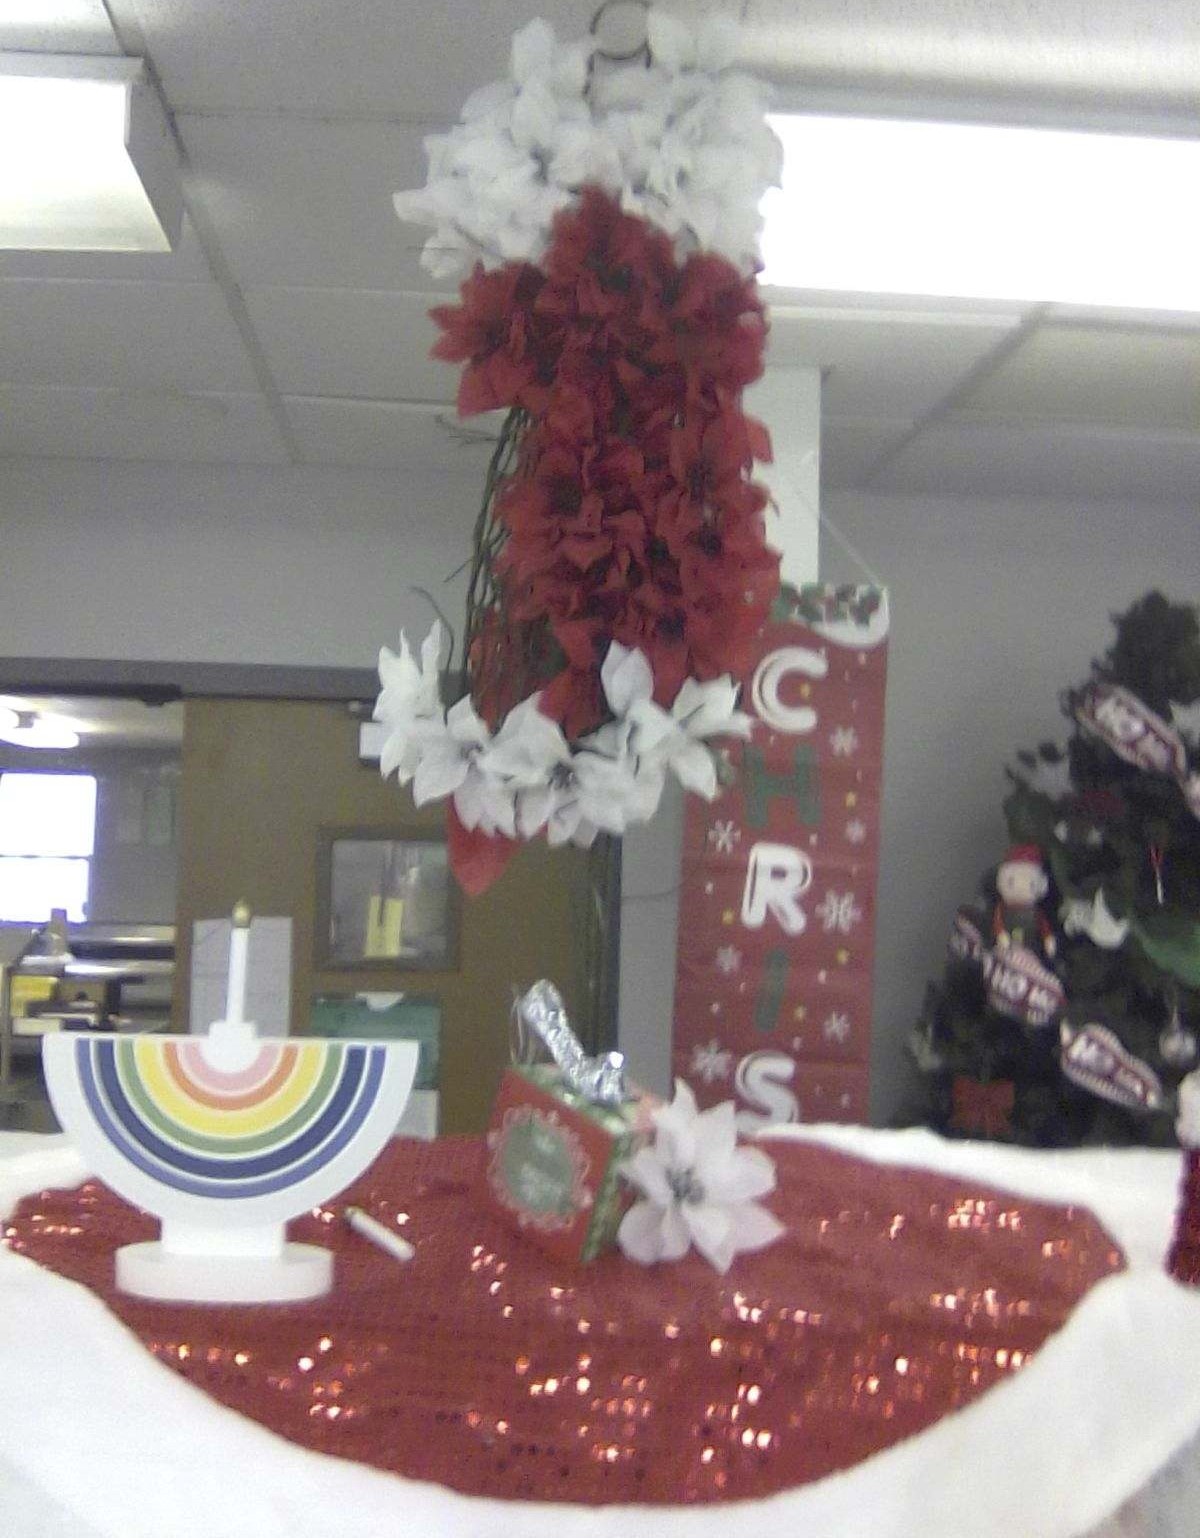 CAFETERIA HOLIDAY DECORATION CONTEST